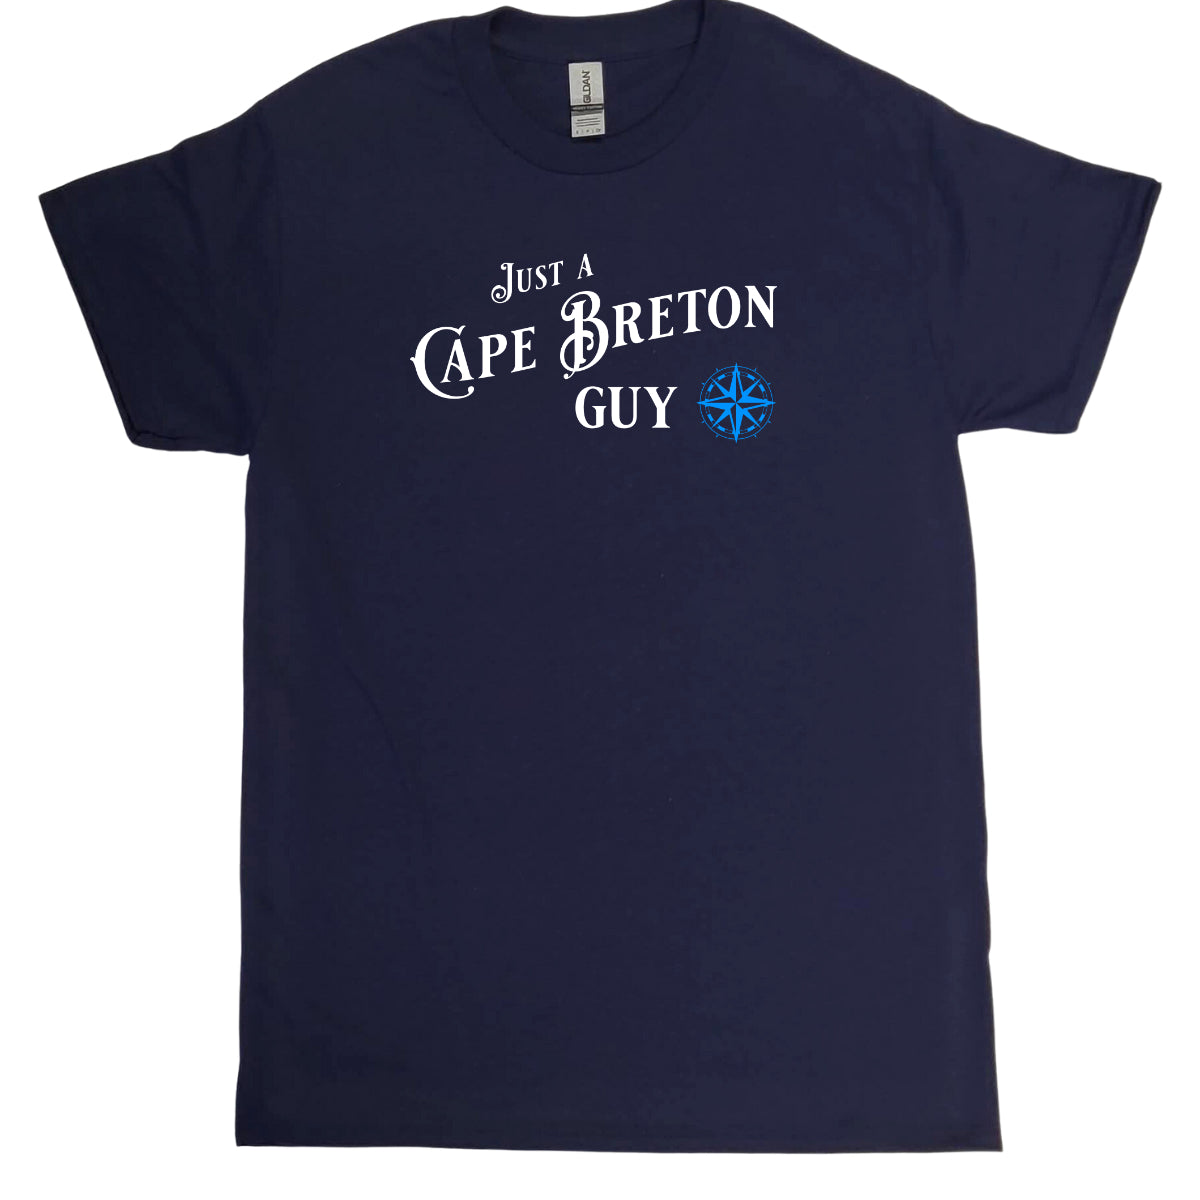 Just a CB Guy Tee